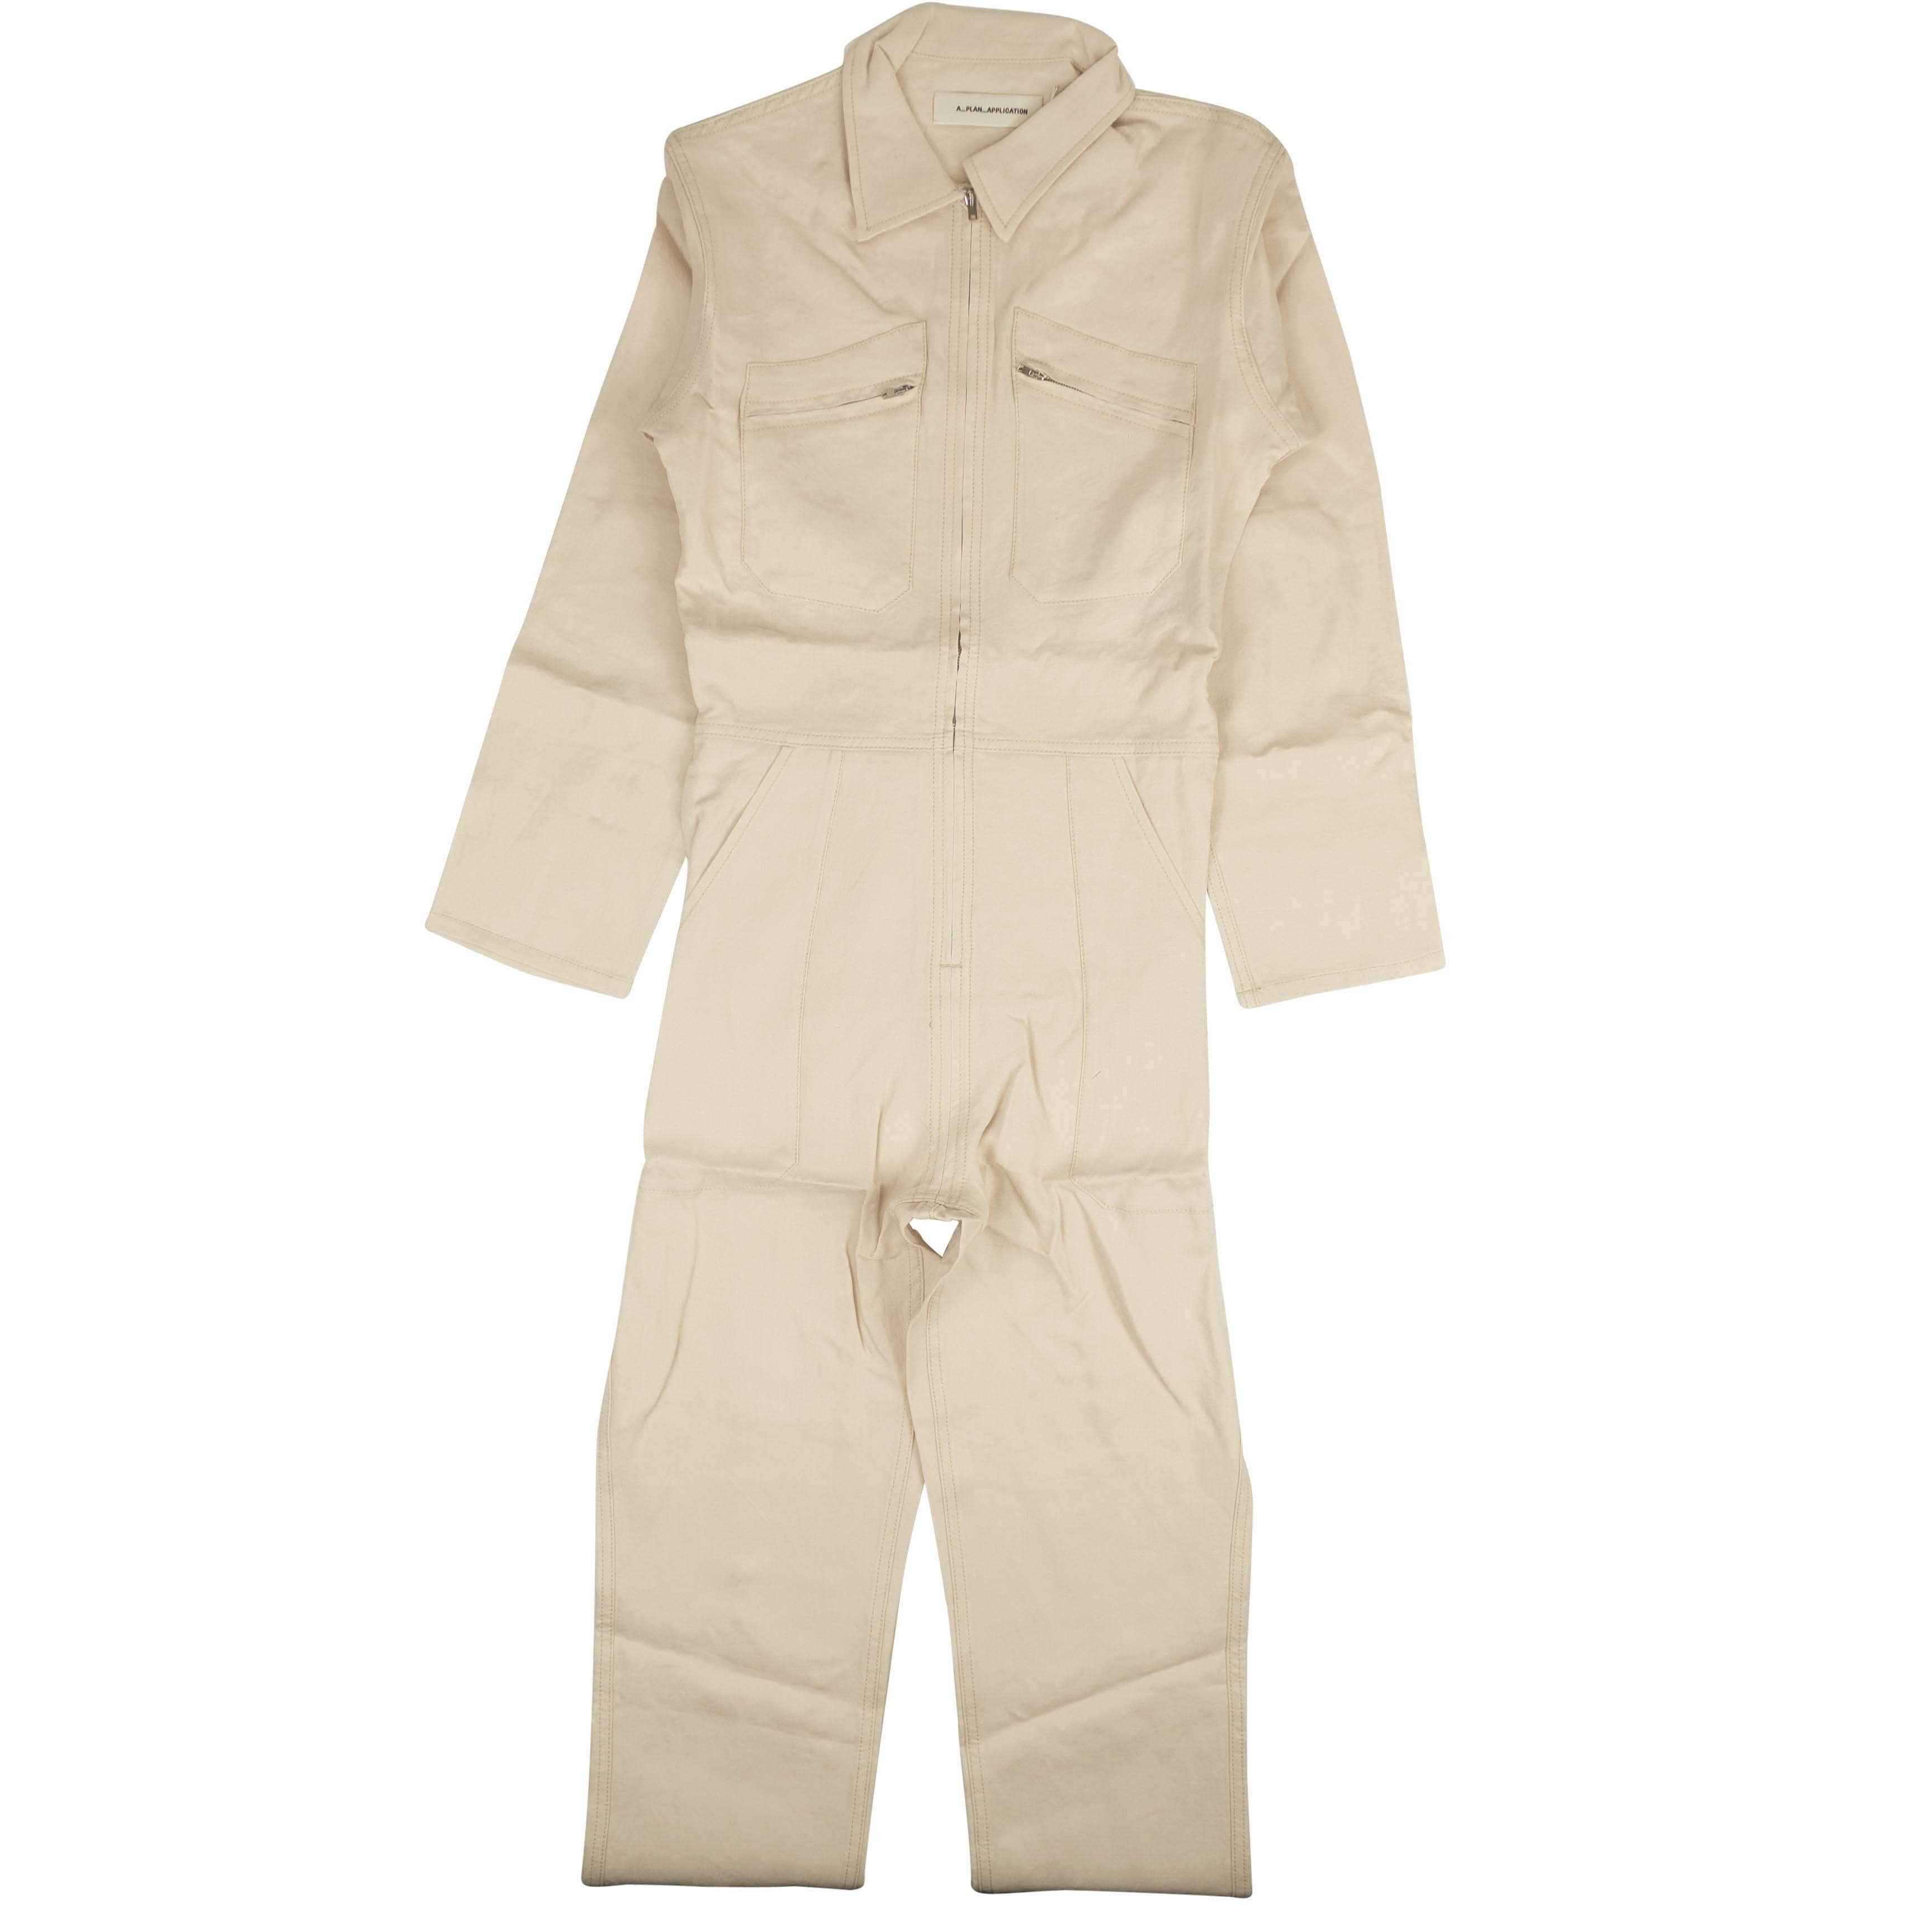 A_Plan_Application 250-500, a_plan_application, channelenable-all, chicmi, couponcollection, gender-womens, main-clothing, size-l, size-m, size-s, size-xs, womens-jumpsuits-rompers Beige Linen Contrast Stitch Jumpsuit